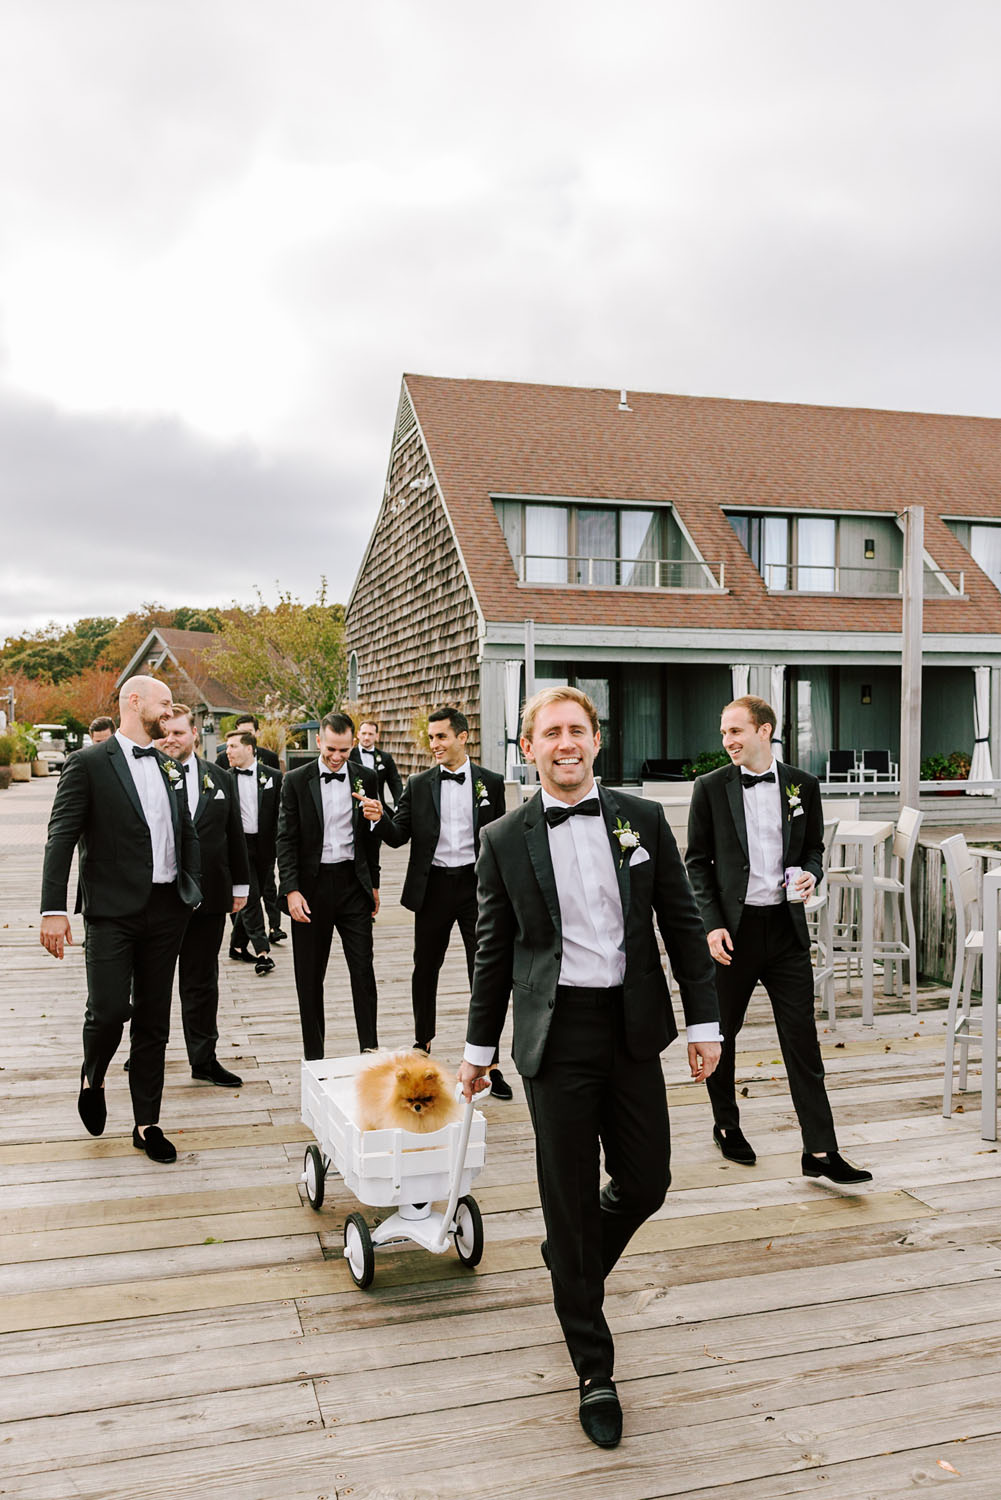 Groom and groomsmen with dog in wedding